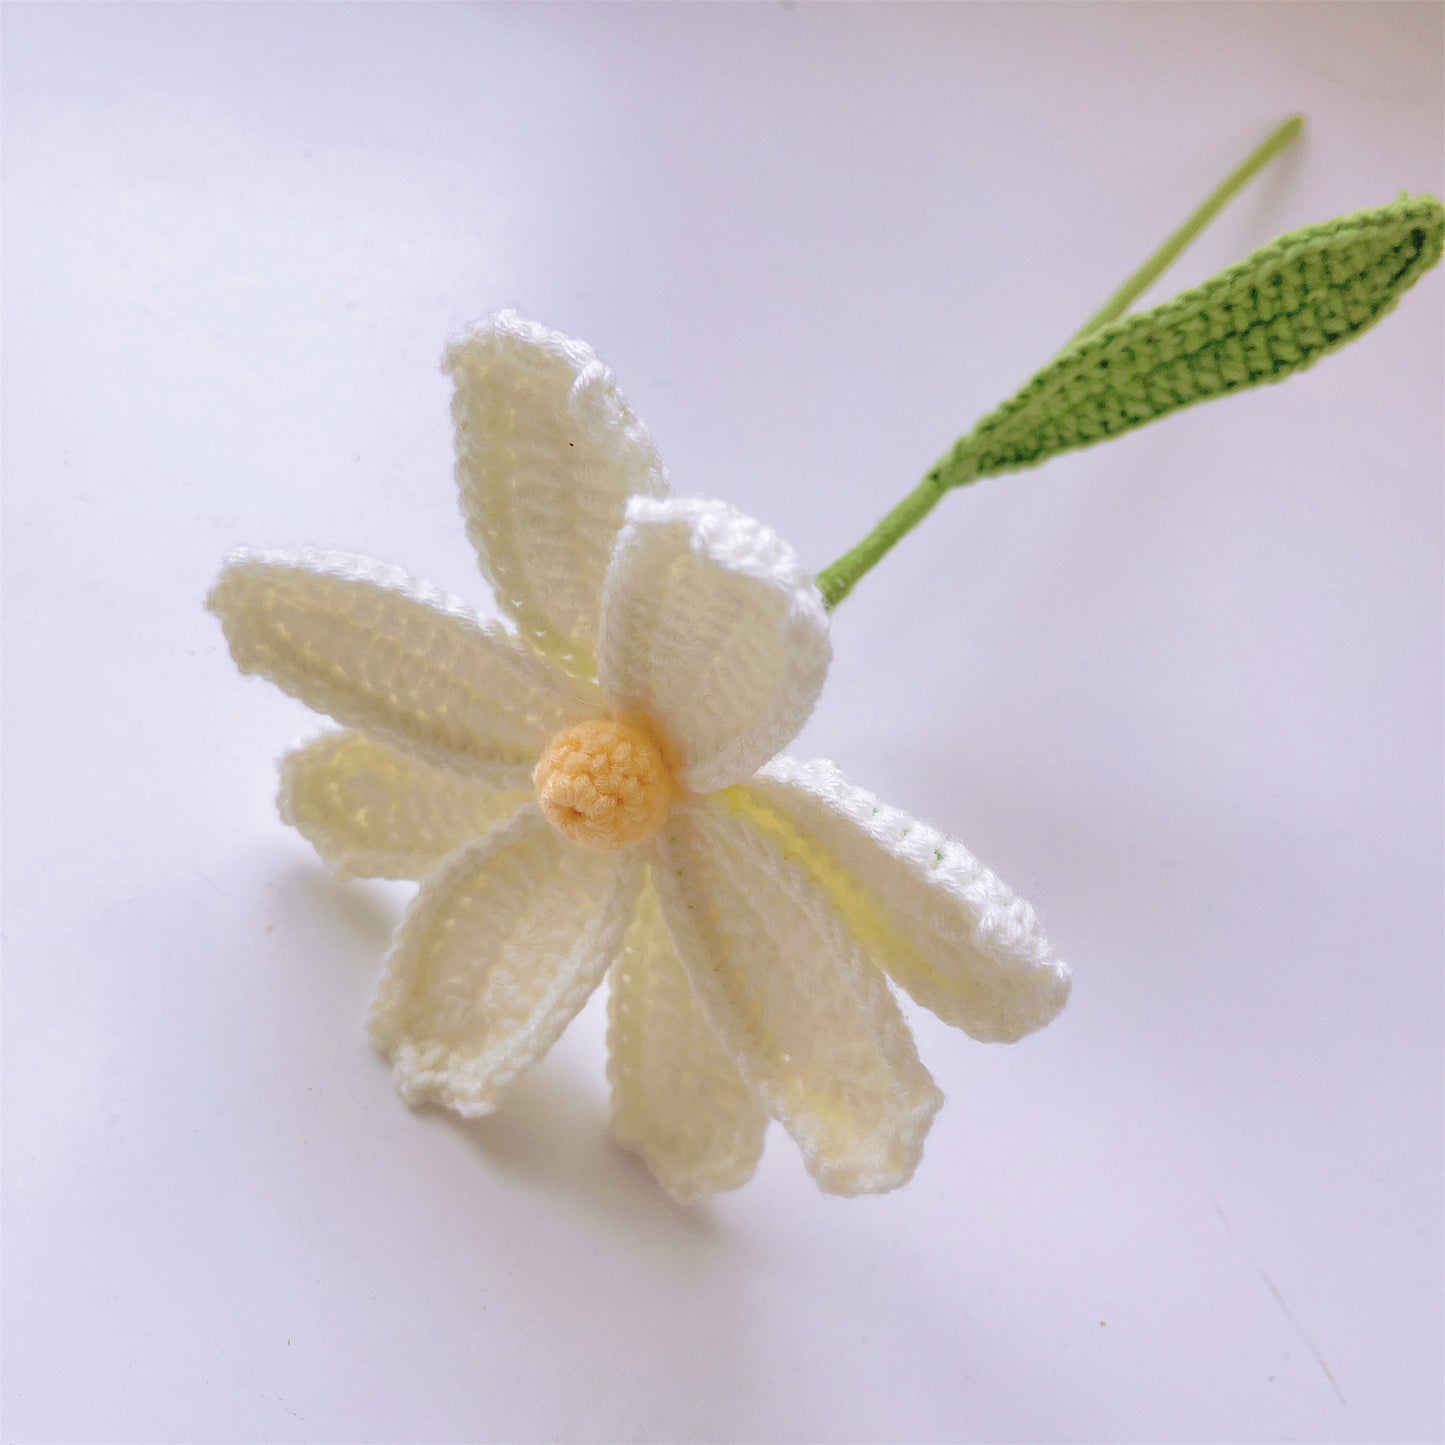 Handmade Crochet Cosmos Bipinnatus - Yarn Crafted, Home Decor, Gift Idea, Delicate and Charming, Symbolic Flower, Fall Decoration for Home